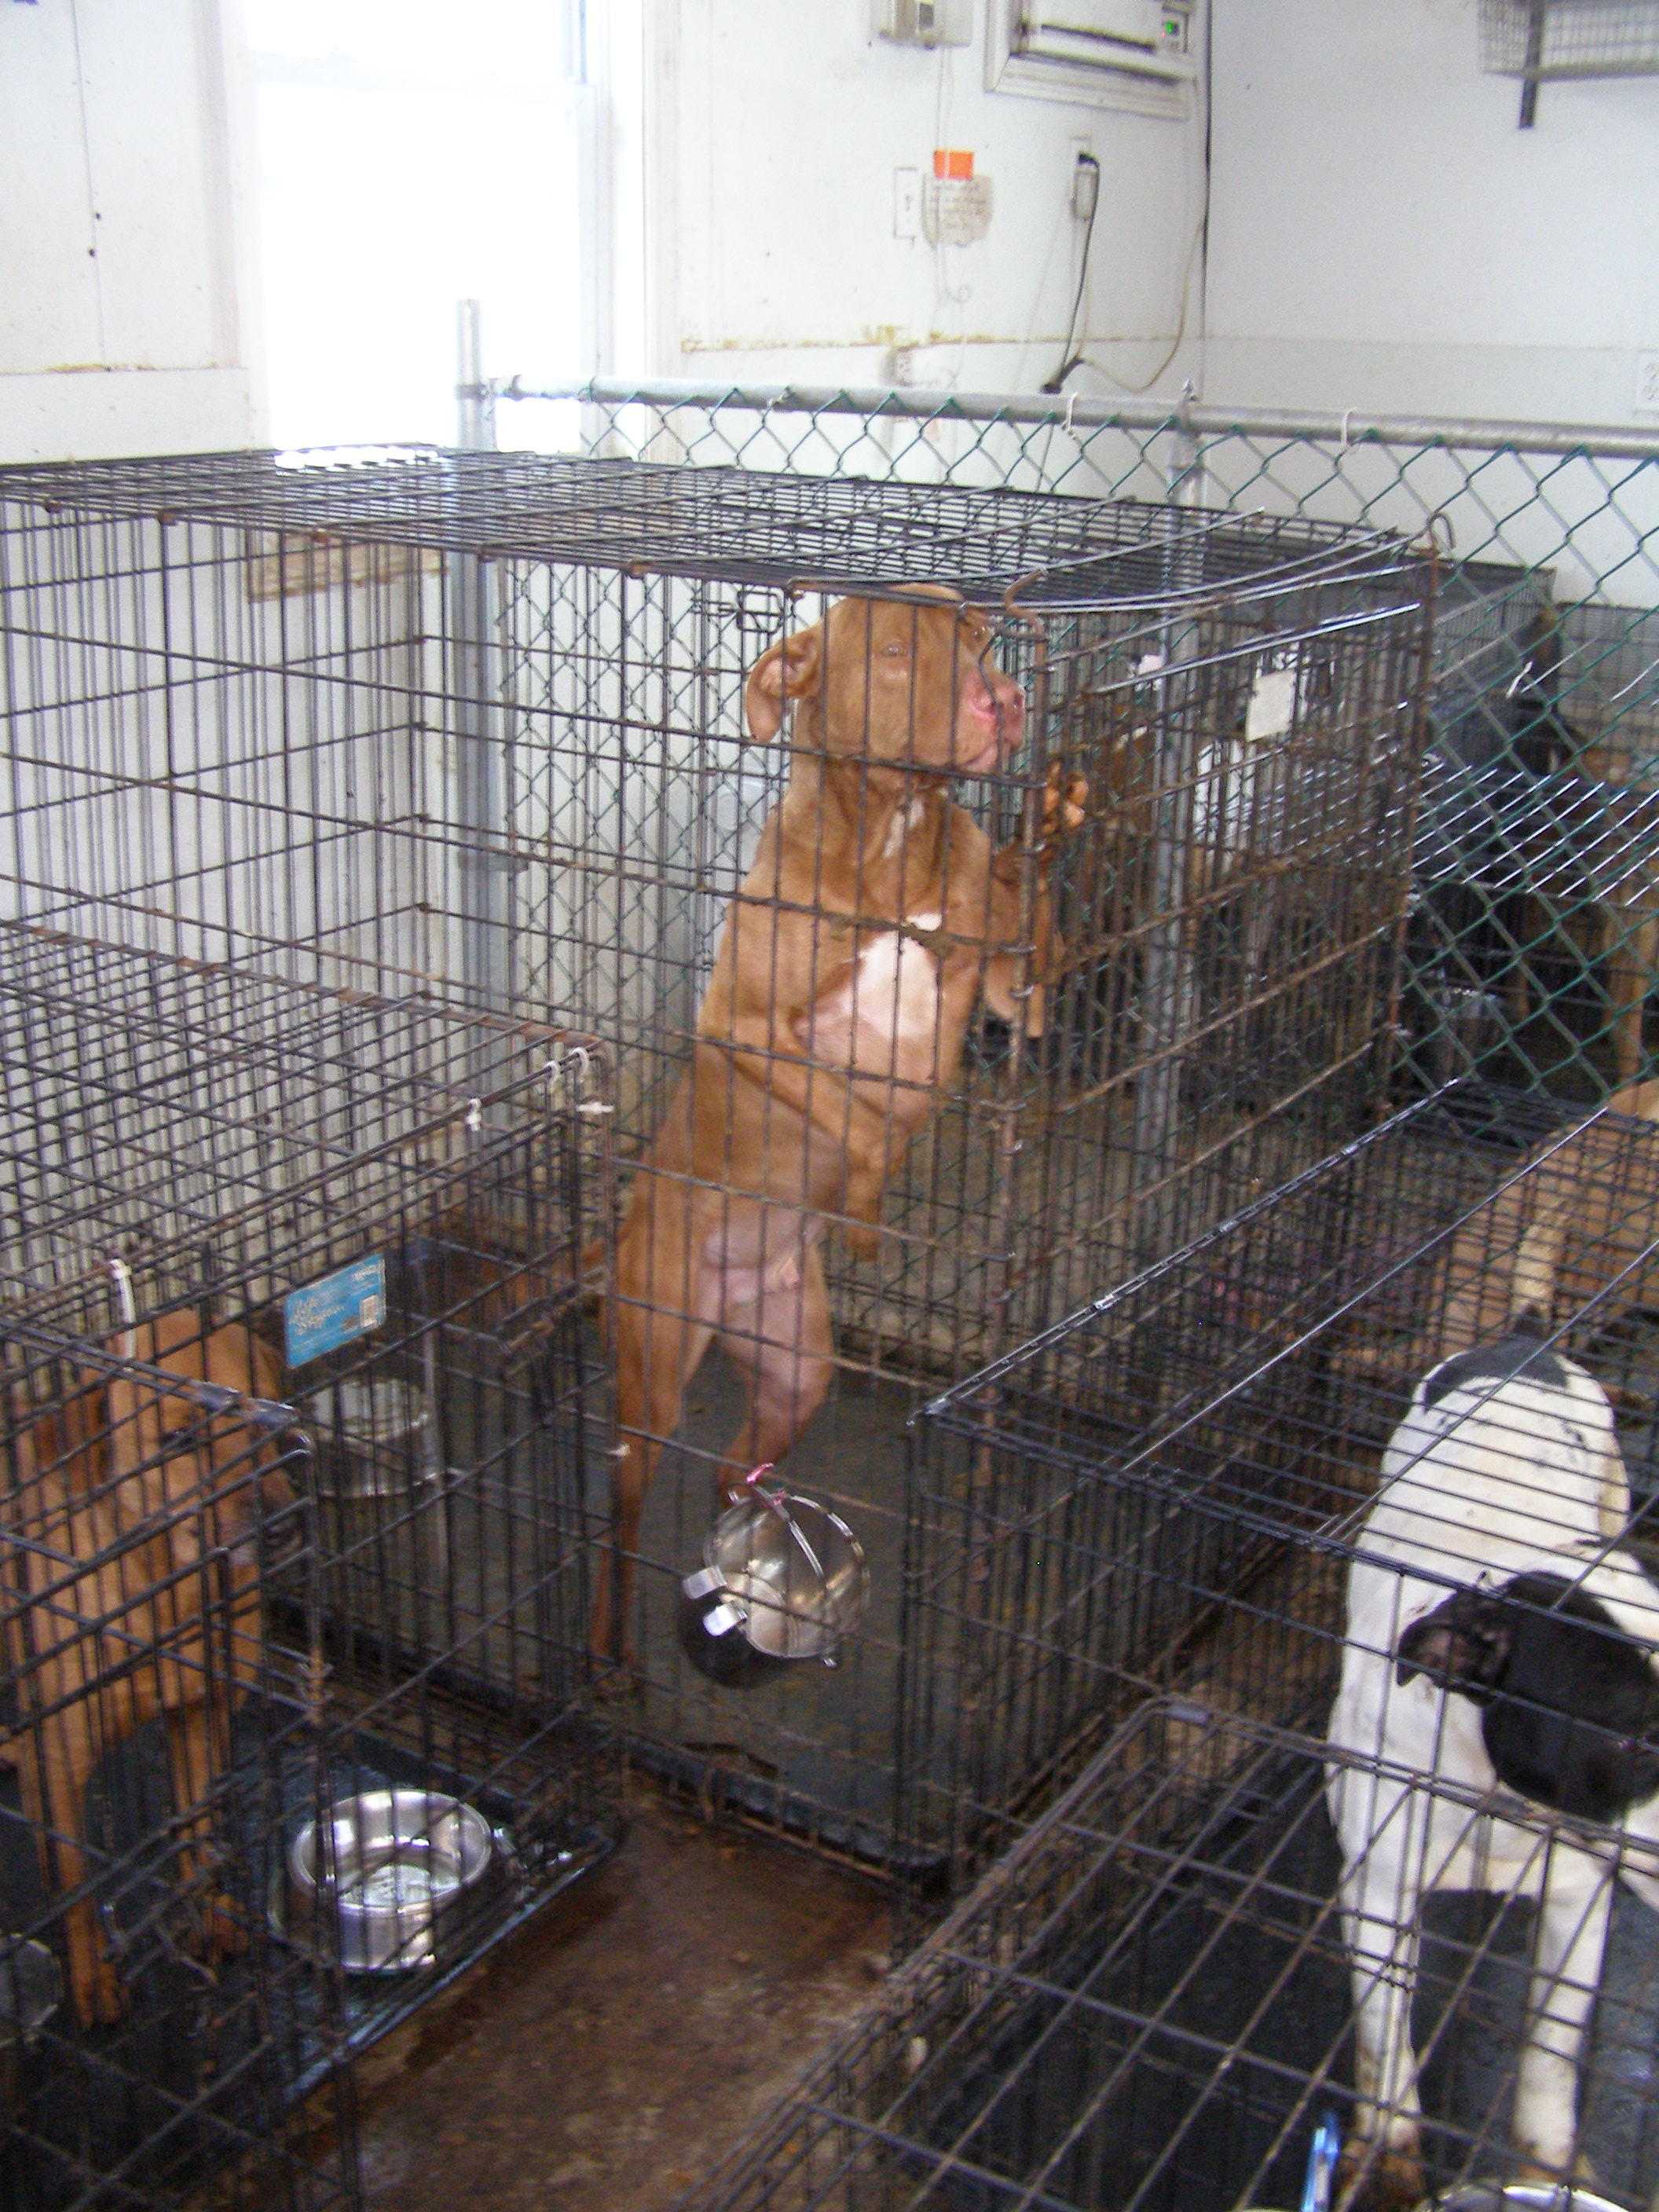 a crime-scene photo of a "no-kill" rescue, showing dogs in crammed cages